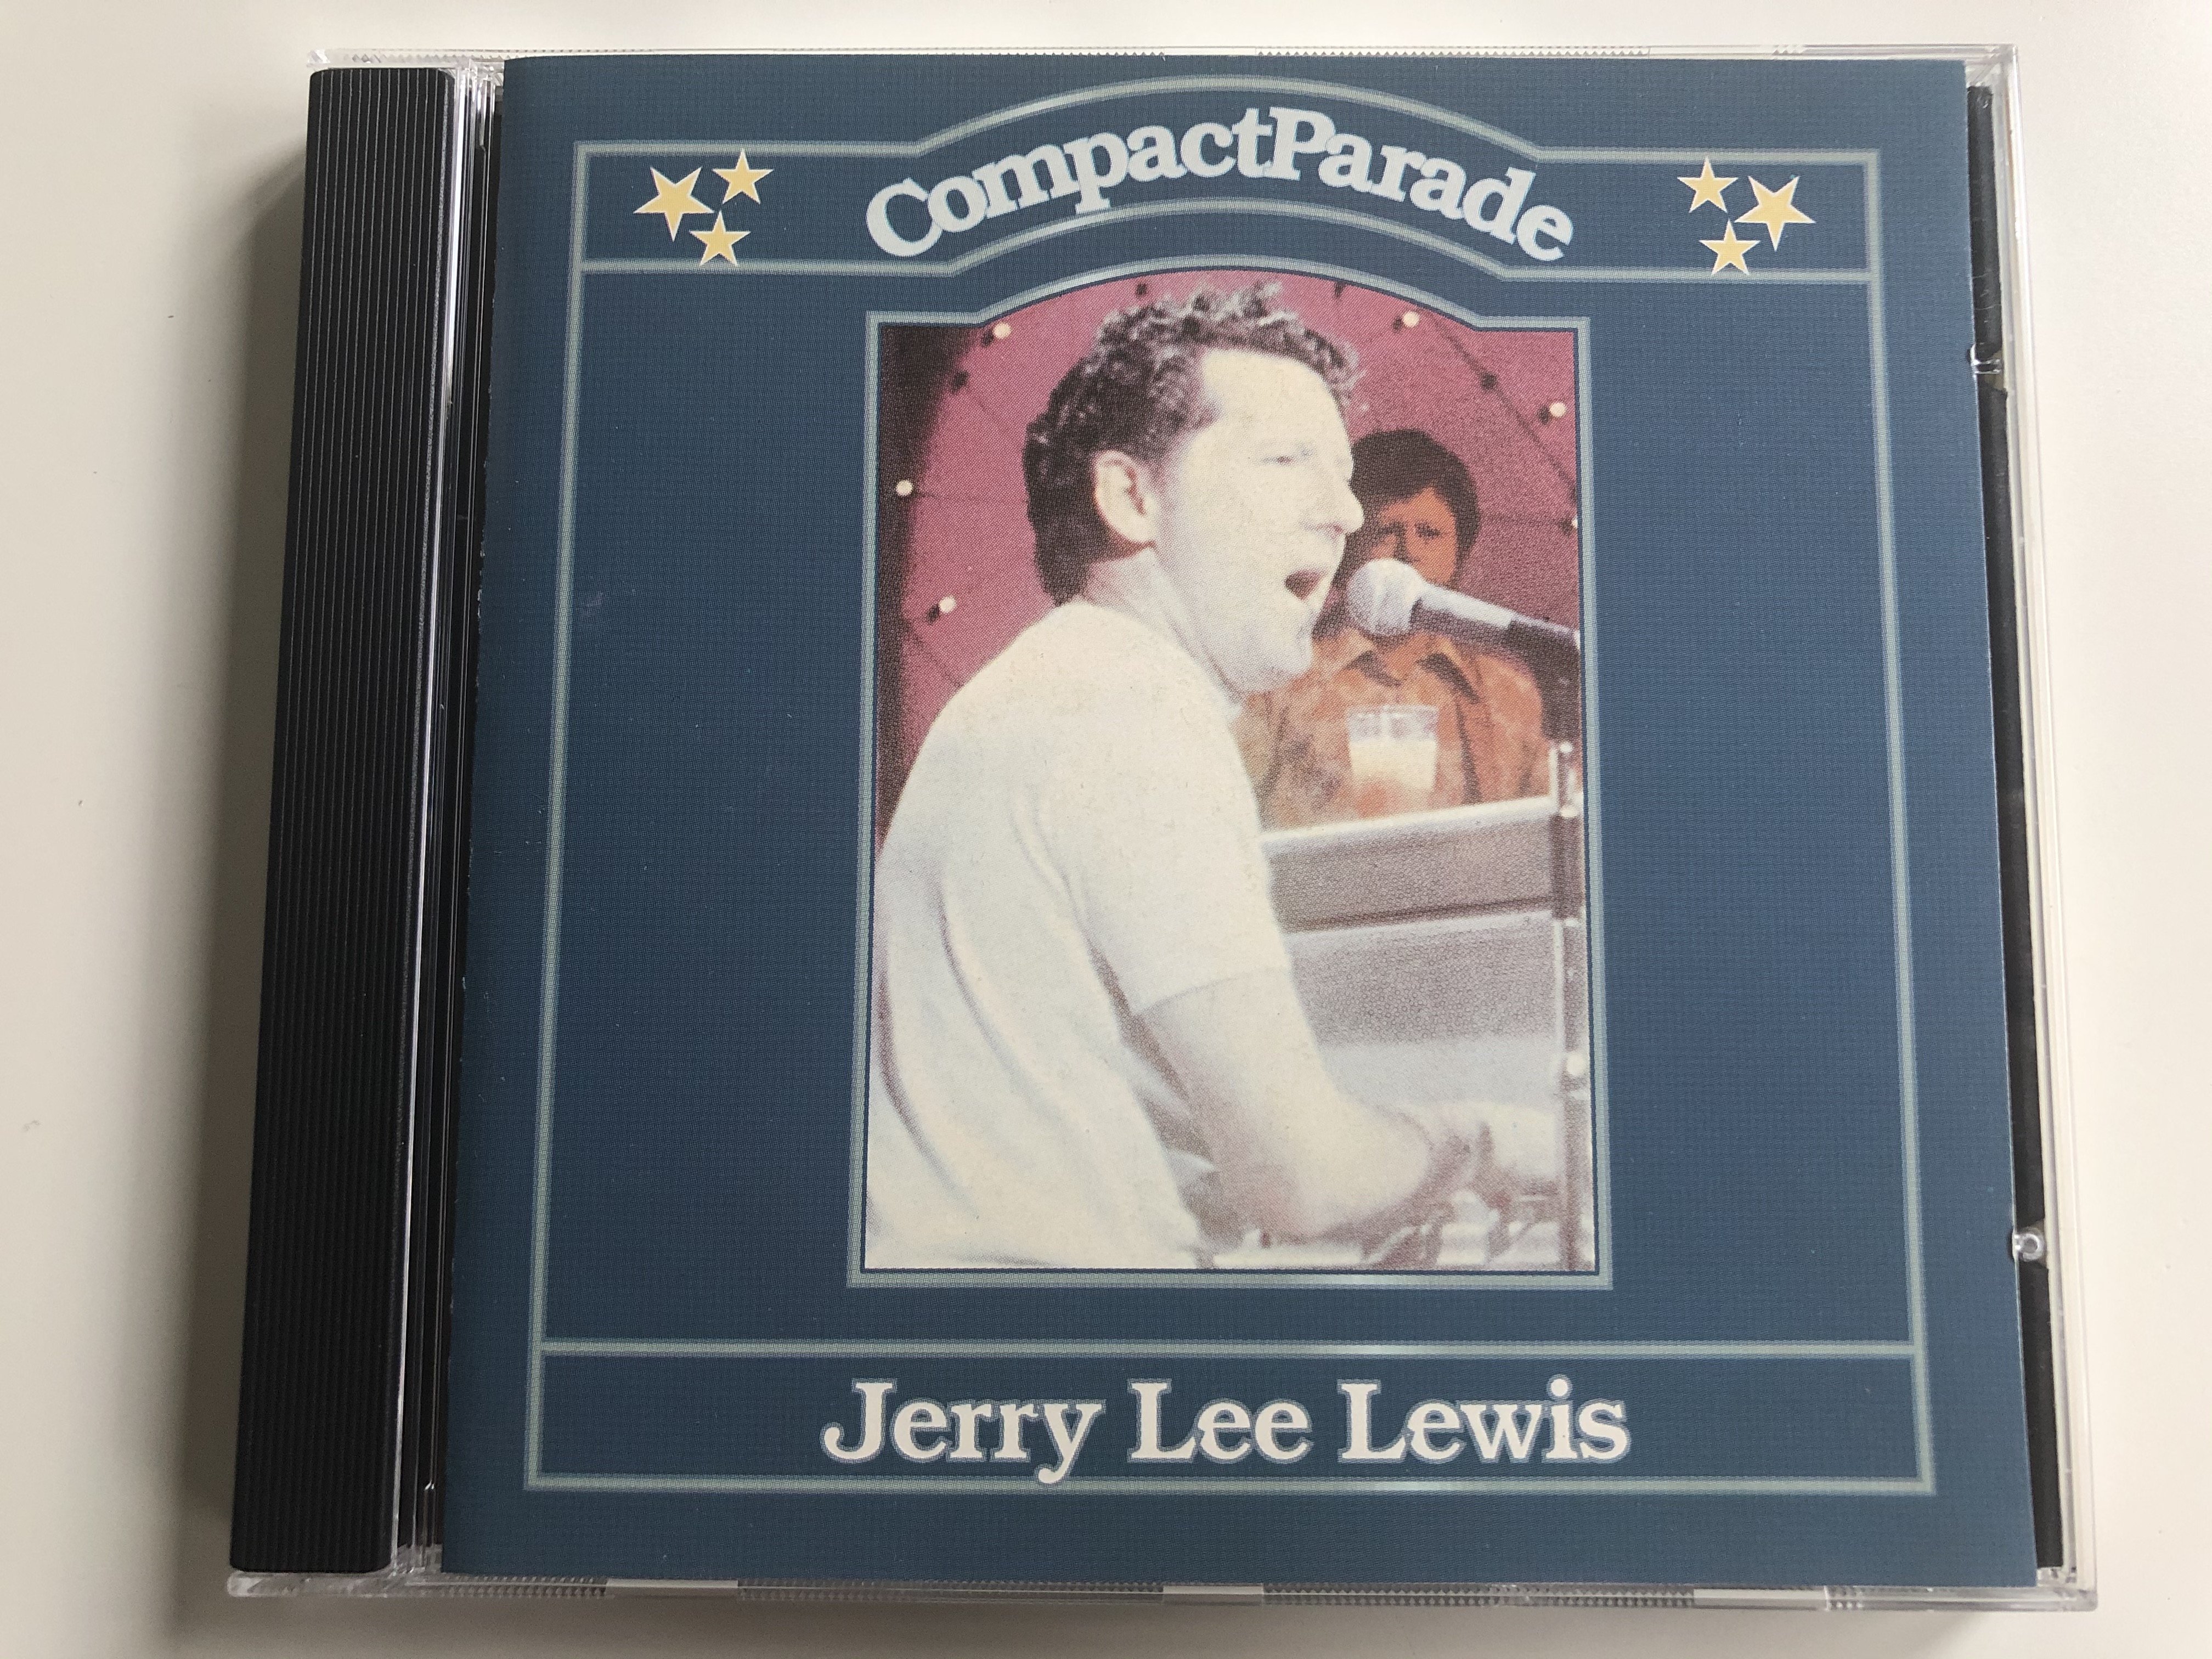 compact-parade-jerry-lee-lewis-m.c.r.-productions-b.v.-audio-cd-1990-047-006-1-.jpg